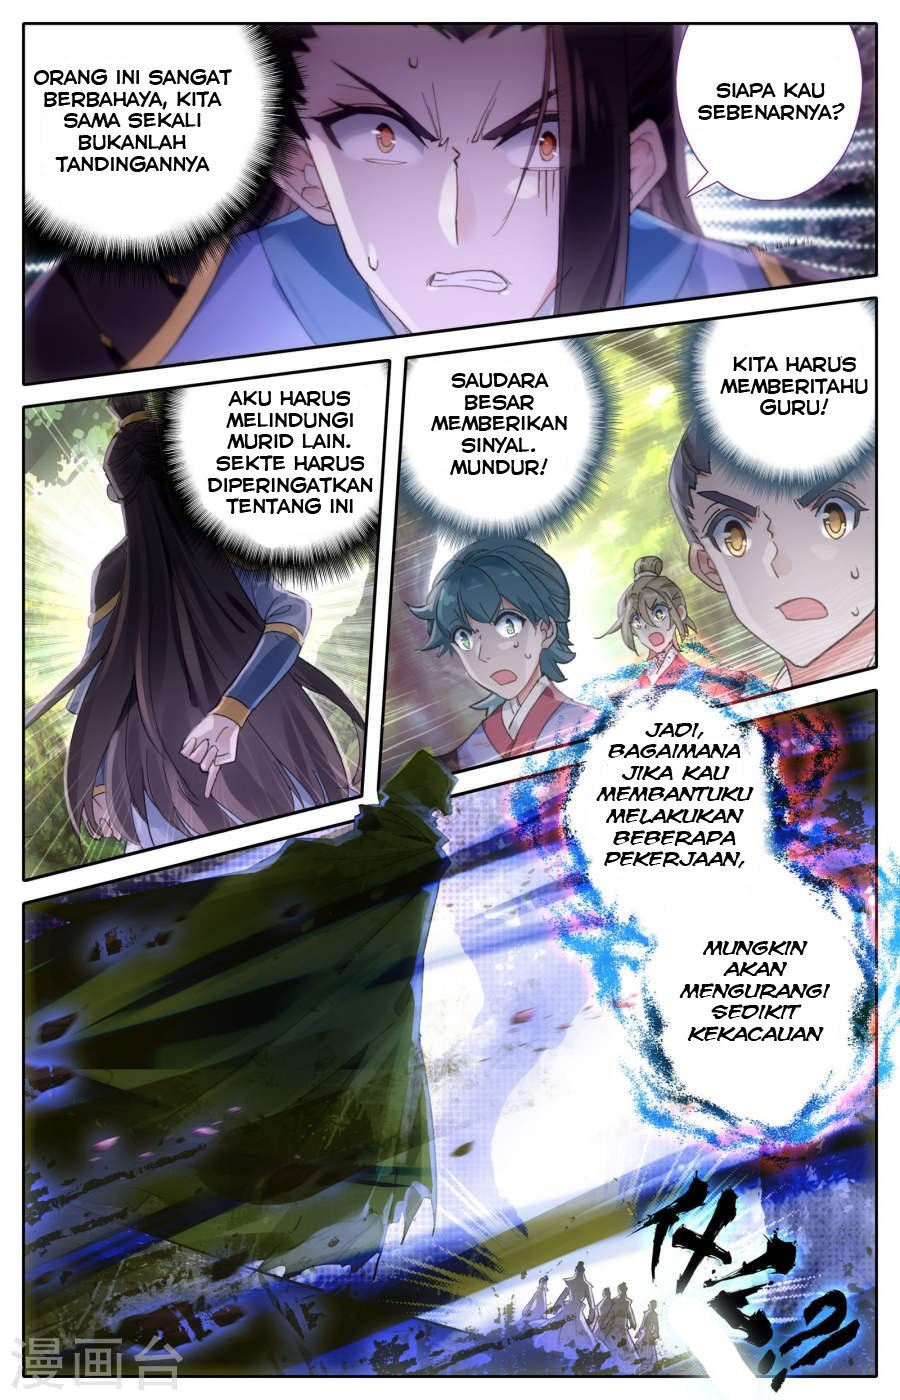 The Heaven List Chapter 02.5